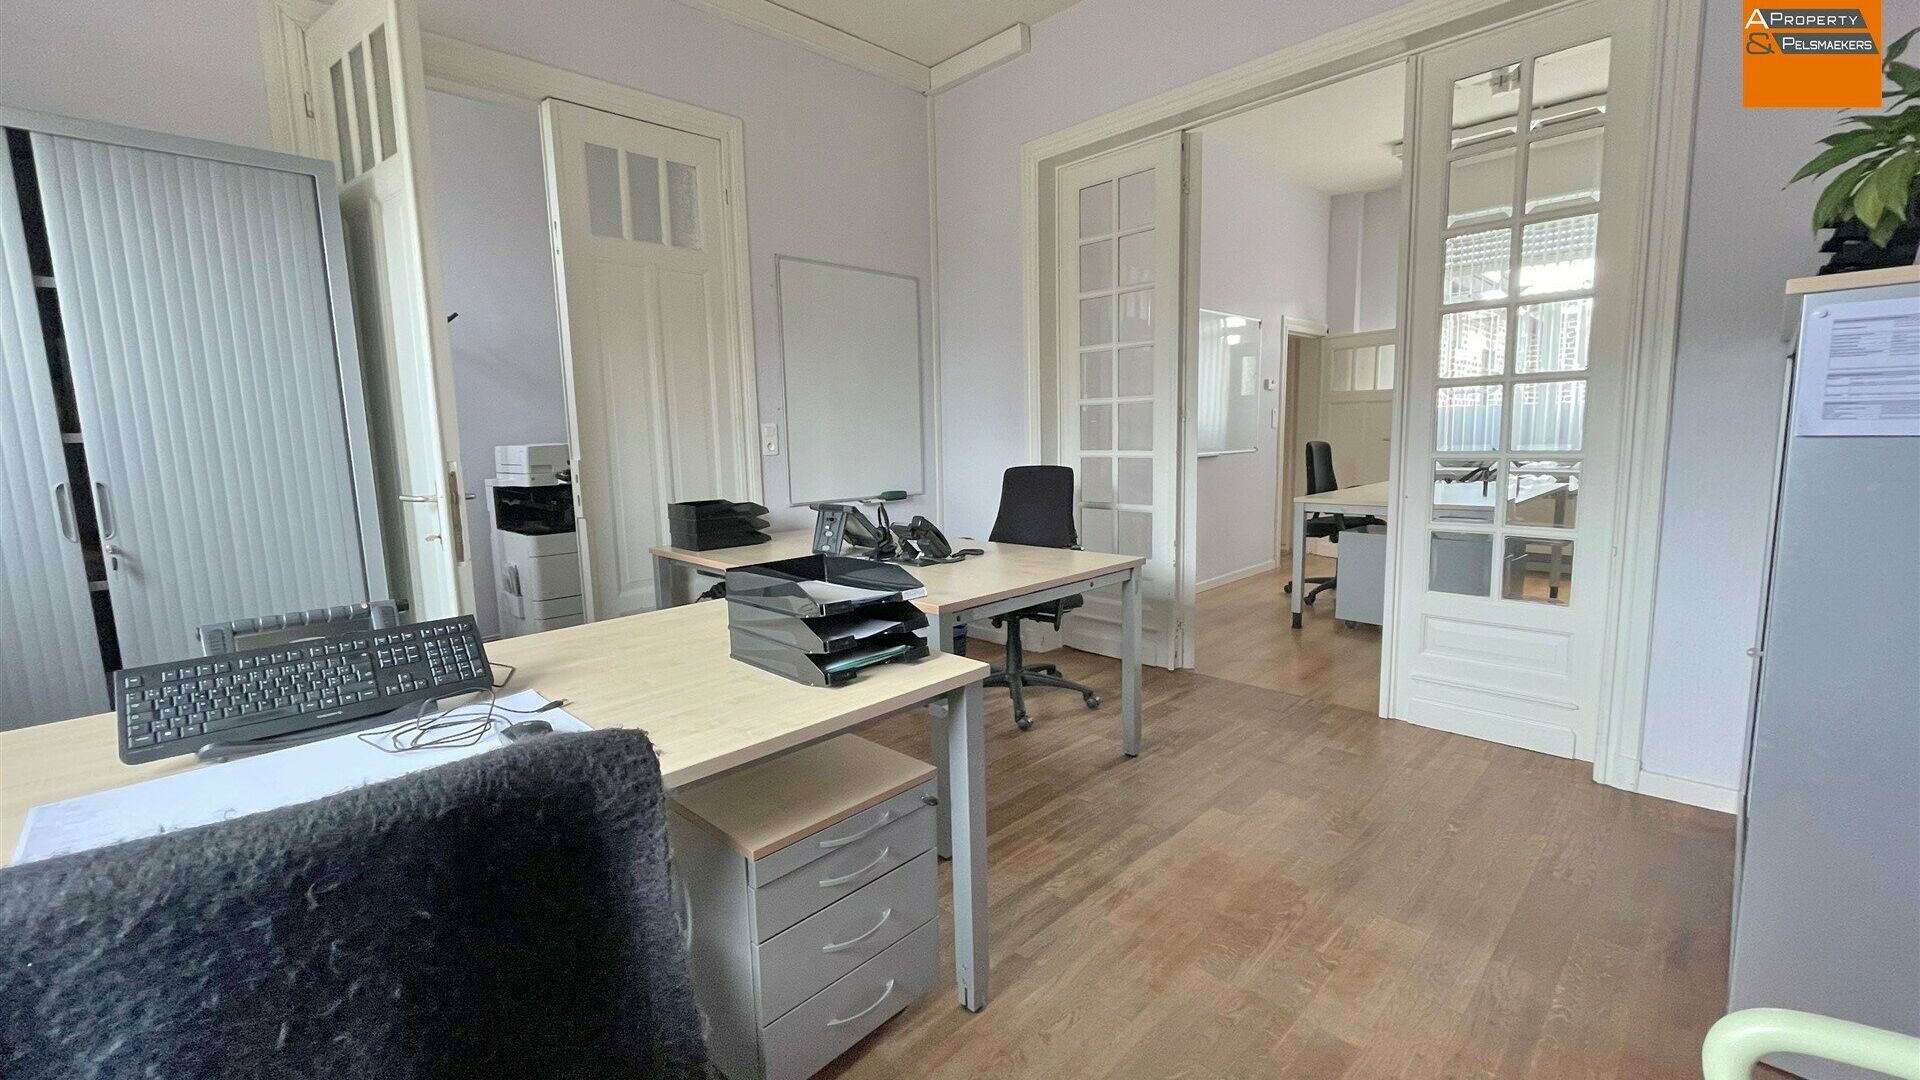 Offices for rent in Haacht